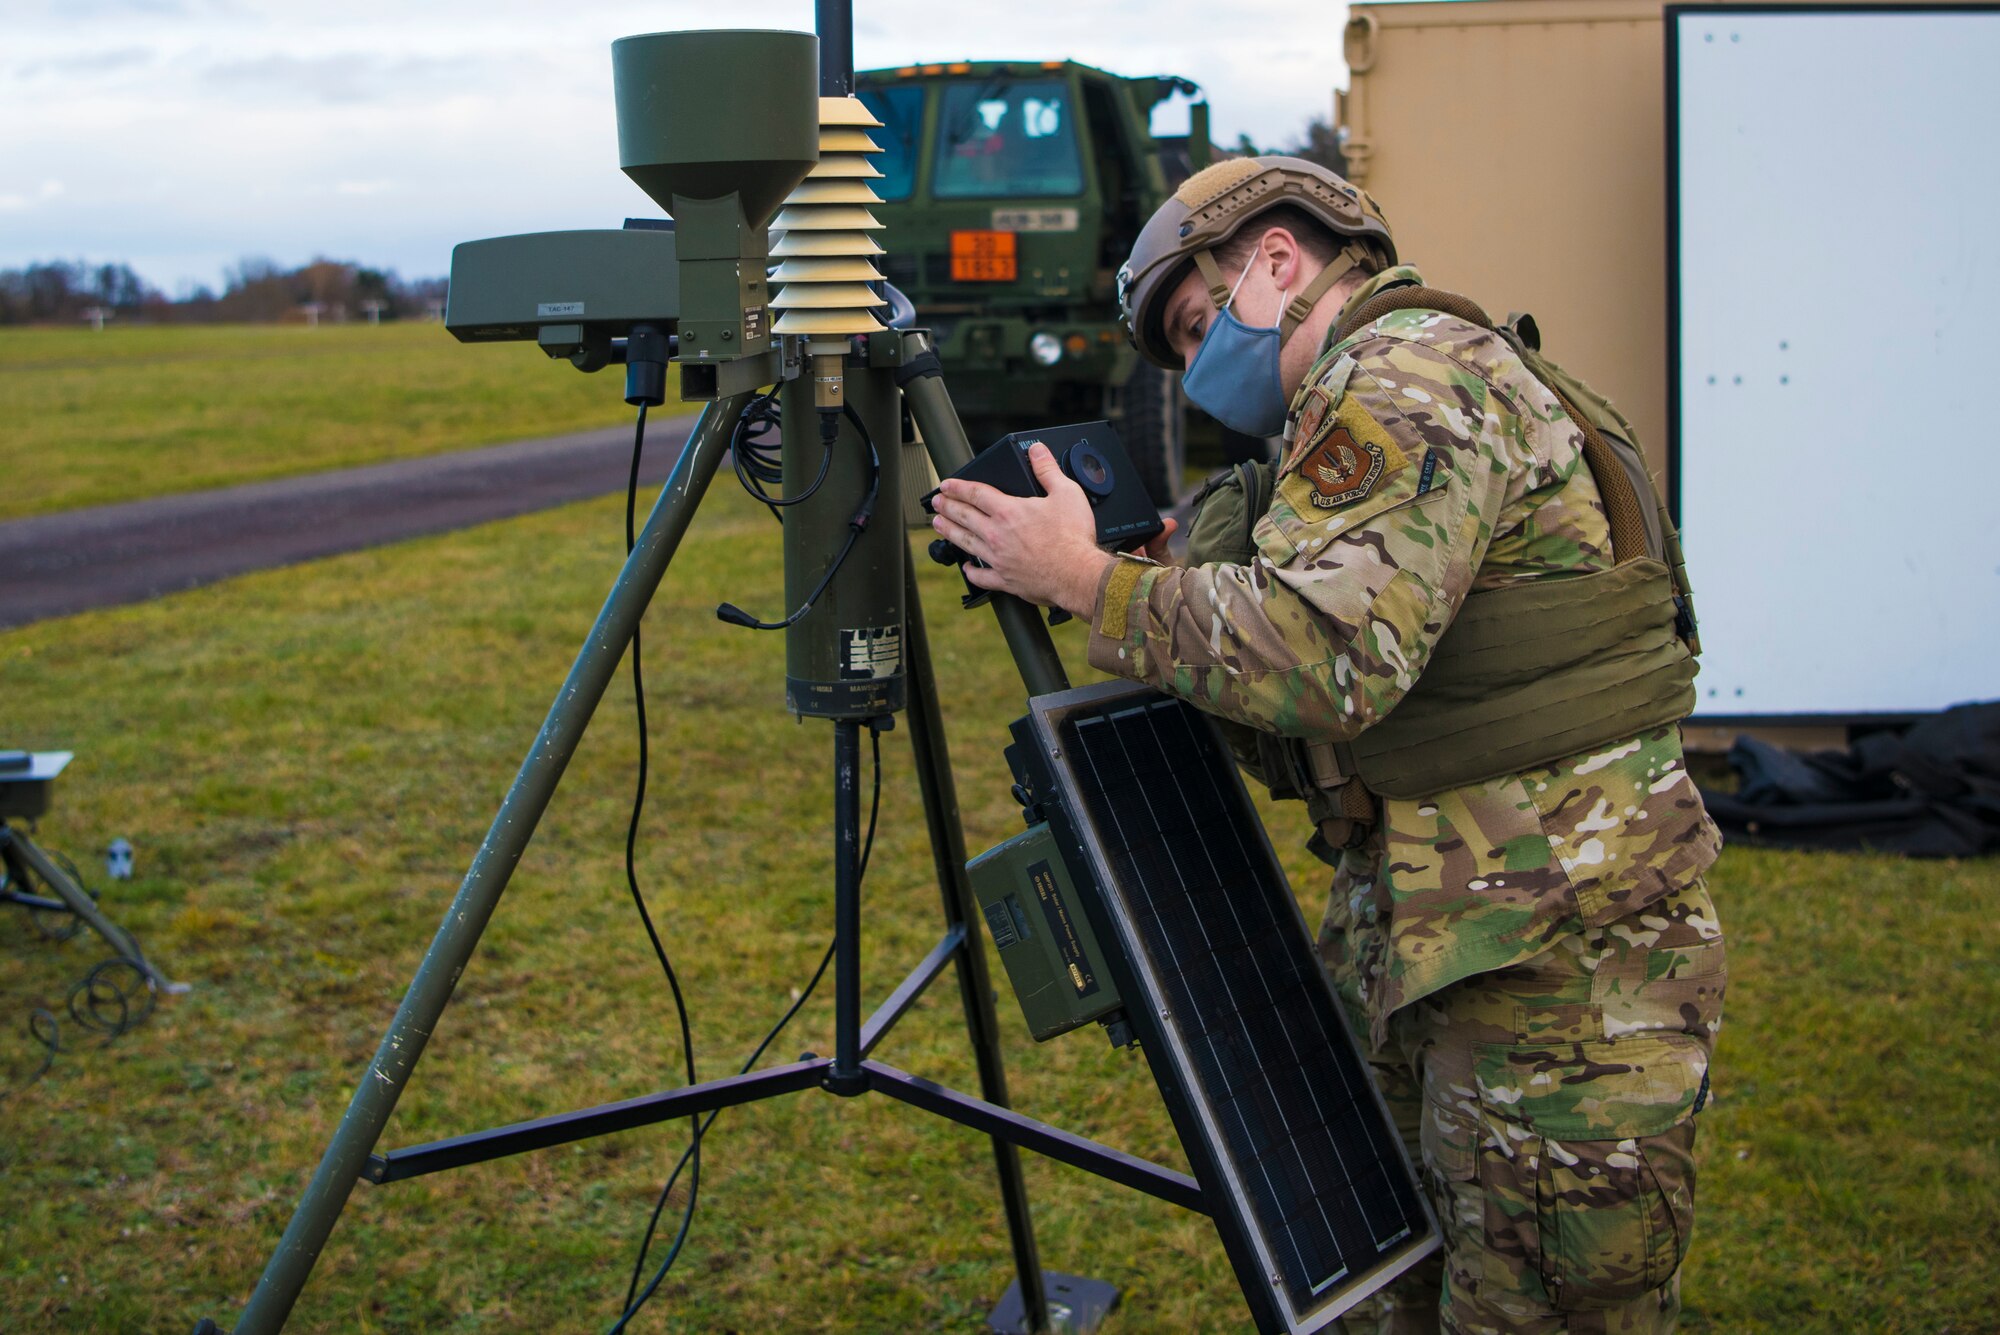 U.S. Air Force Staff. Sgt. John Baldelli, 435th Contingency Response Squadron weather forecaster, configures a tactical meteorological observing system as part of a base build-up during exercise Agile Wolf 21-01